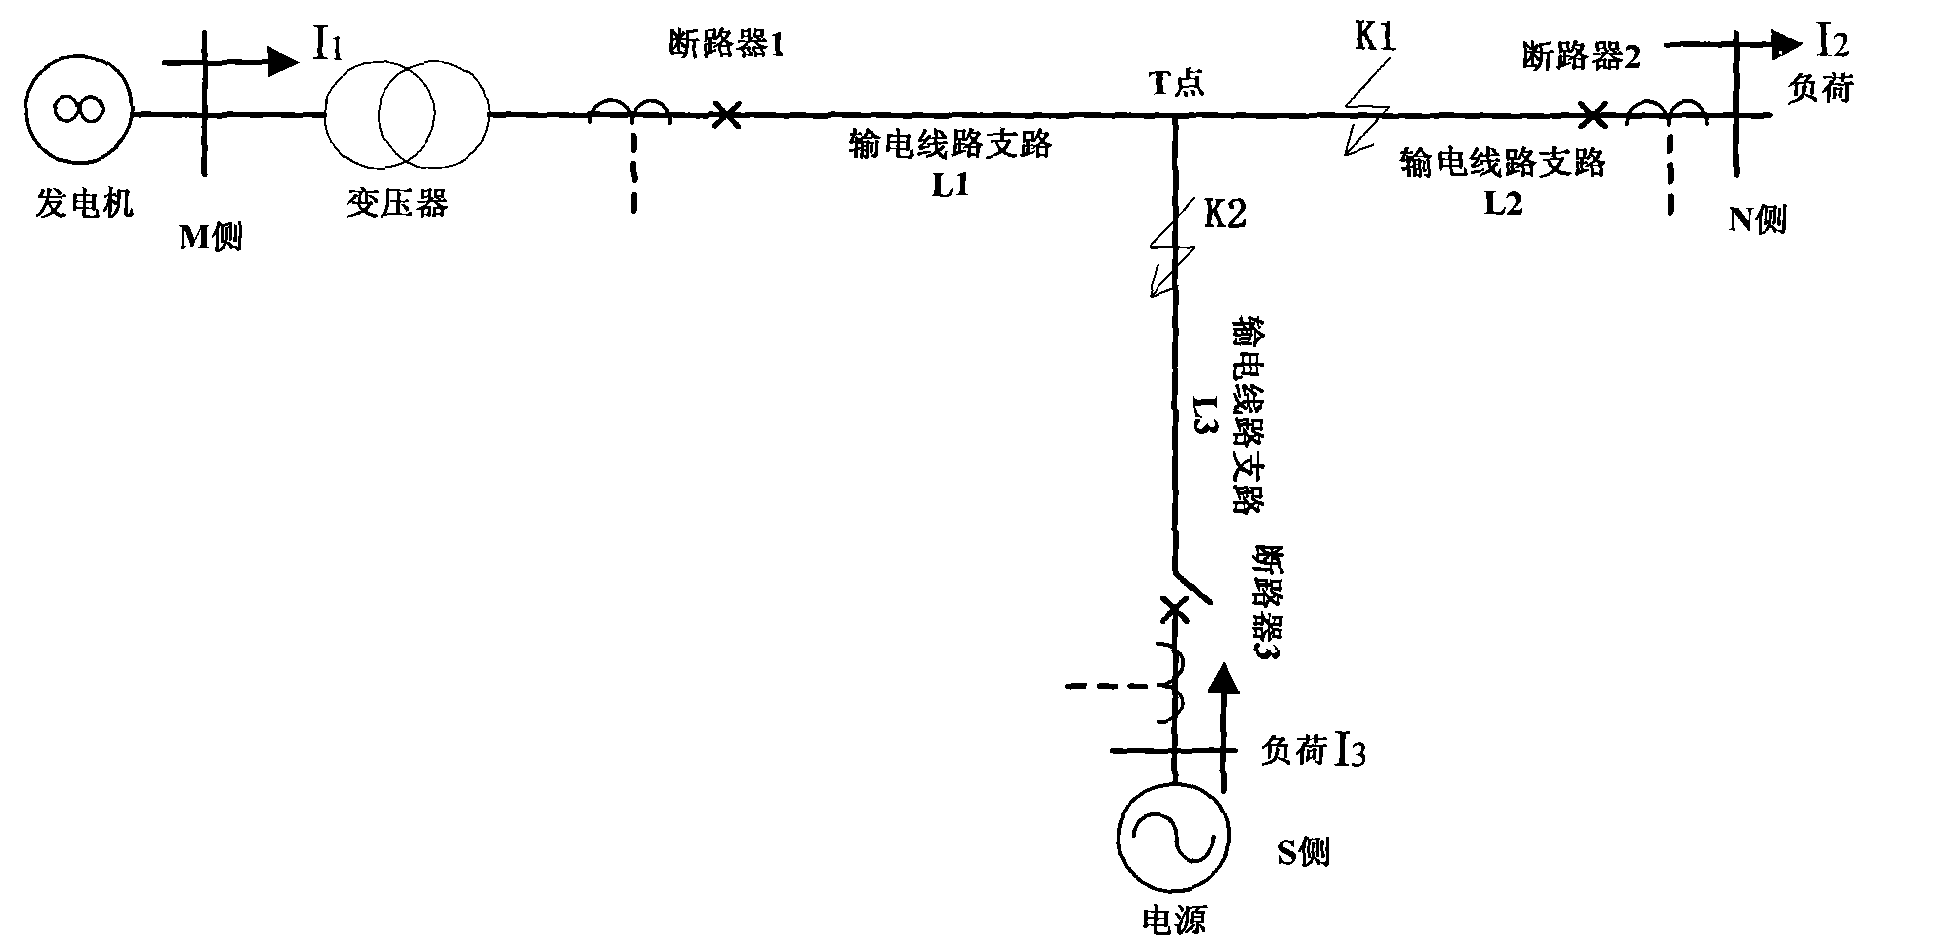 Fault localization method suitable for three-terminal T connection electric transmission line